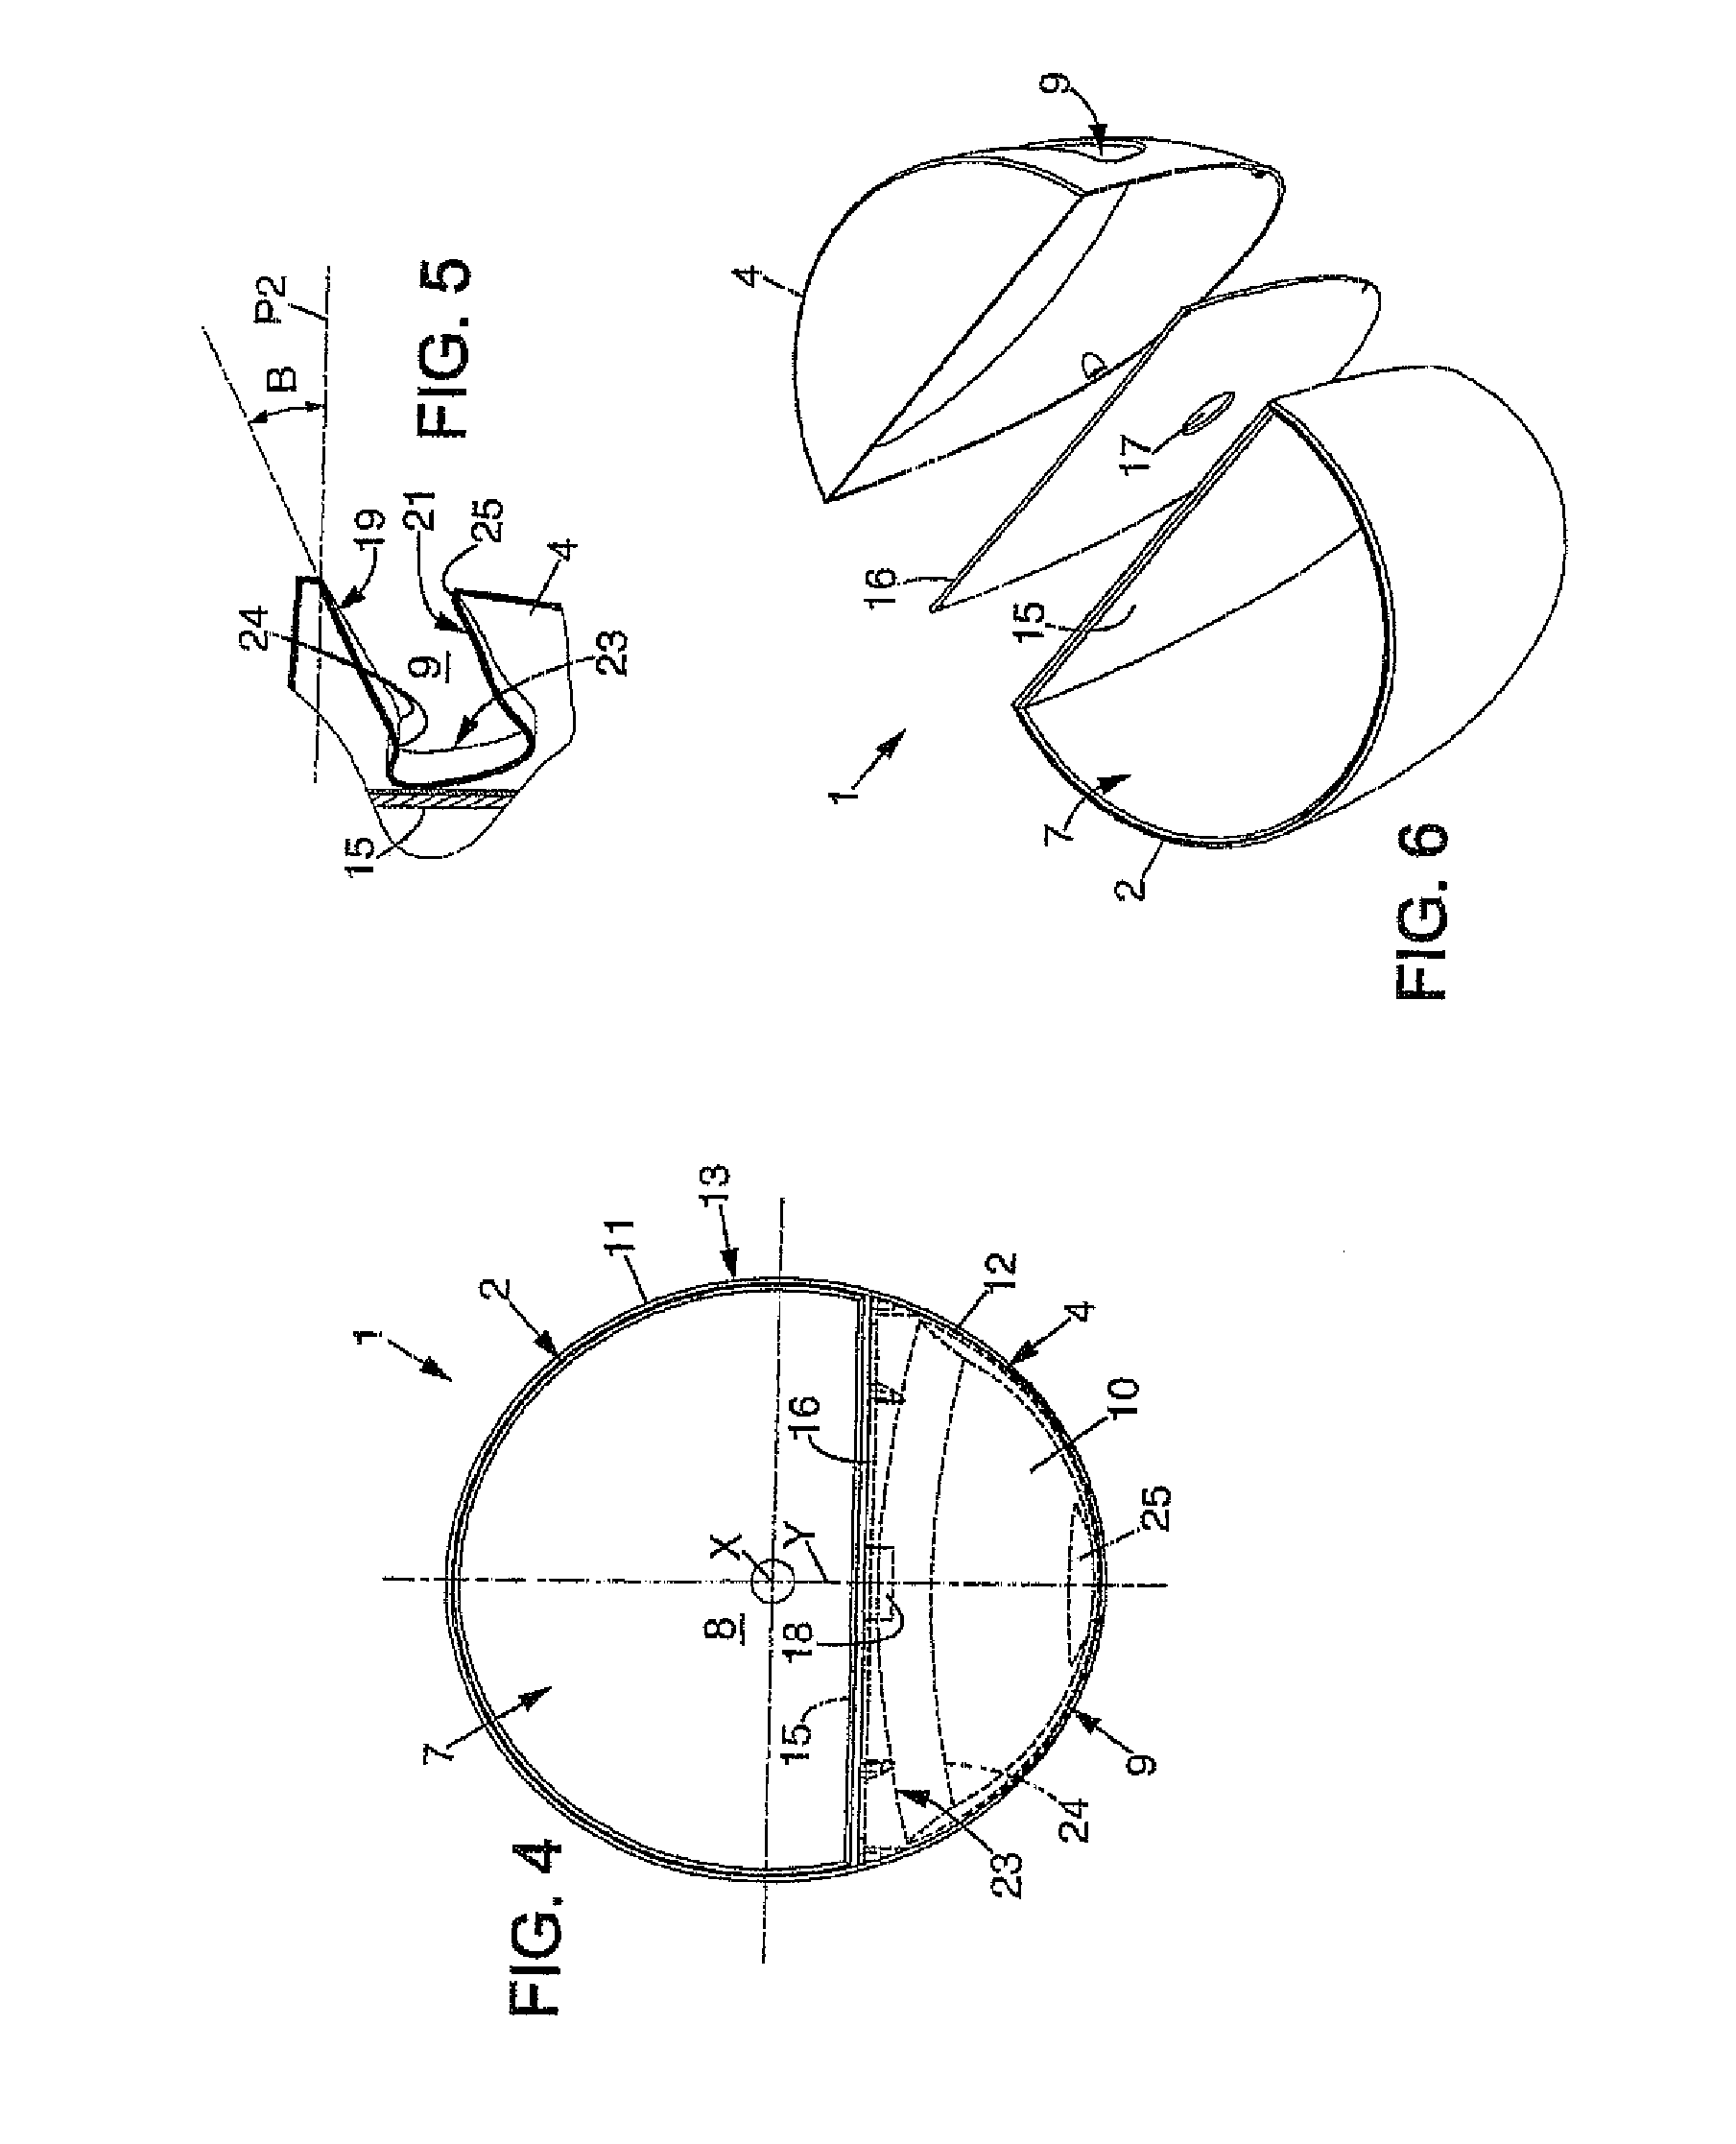 Device Comprising a Container for Bottles